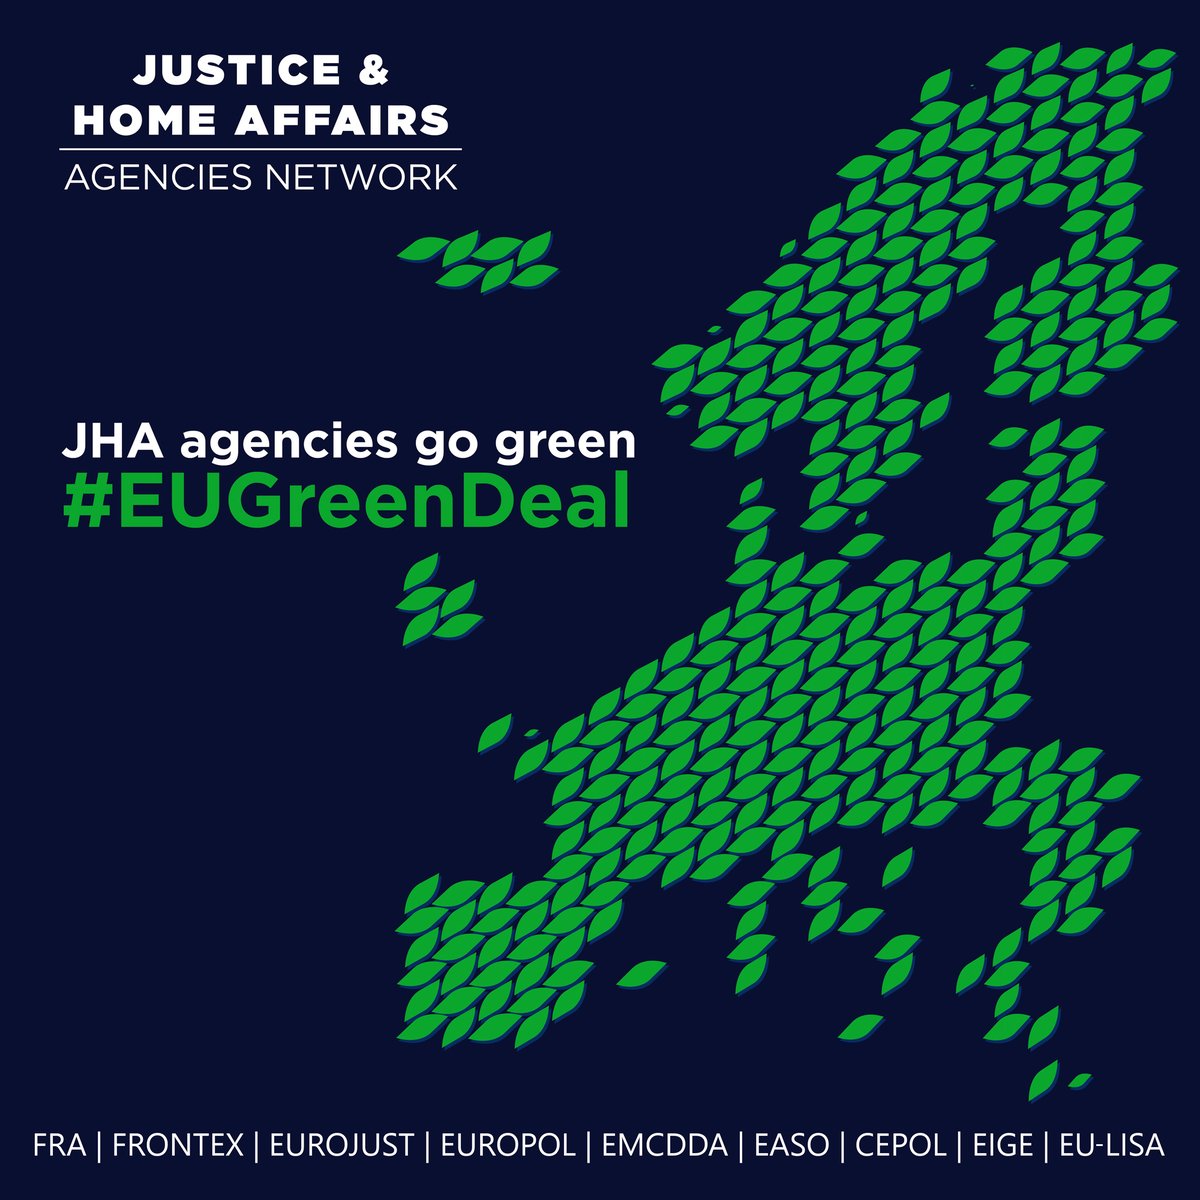 #JHAagencies help make Europe a safer and better home for all of us 🇪🇺 

Want to know more? The final report on the work of the JHA Agencies’ Network in 2021 is out! 

Main focus: environment and digitalisation #EUGreenDeal 

Read more bit.ly/3p5YQFJ